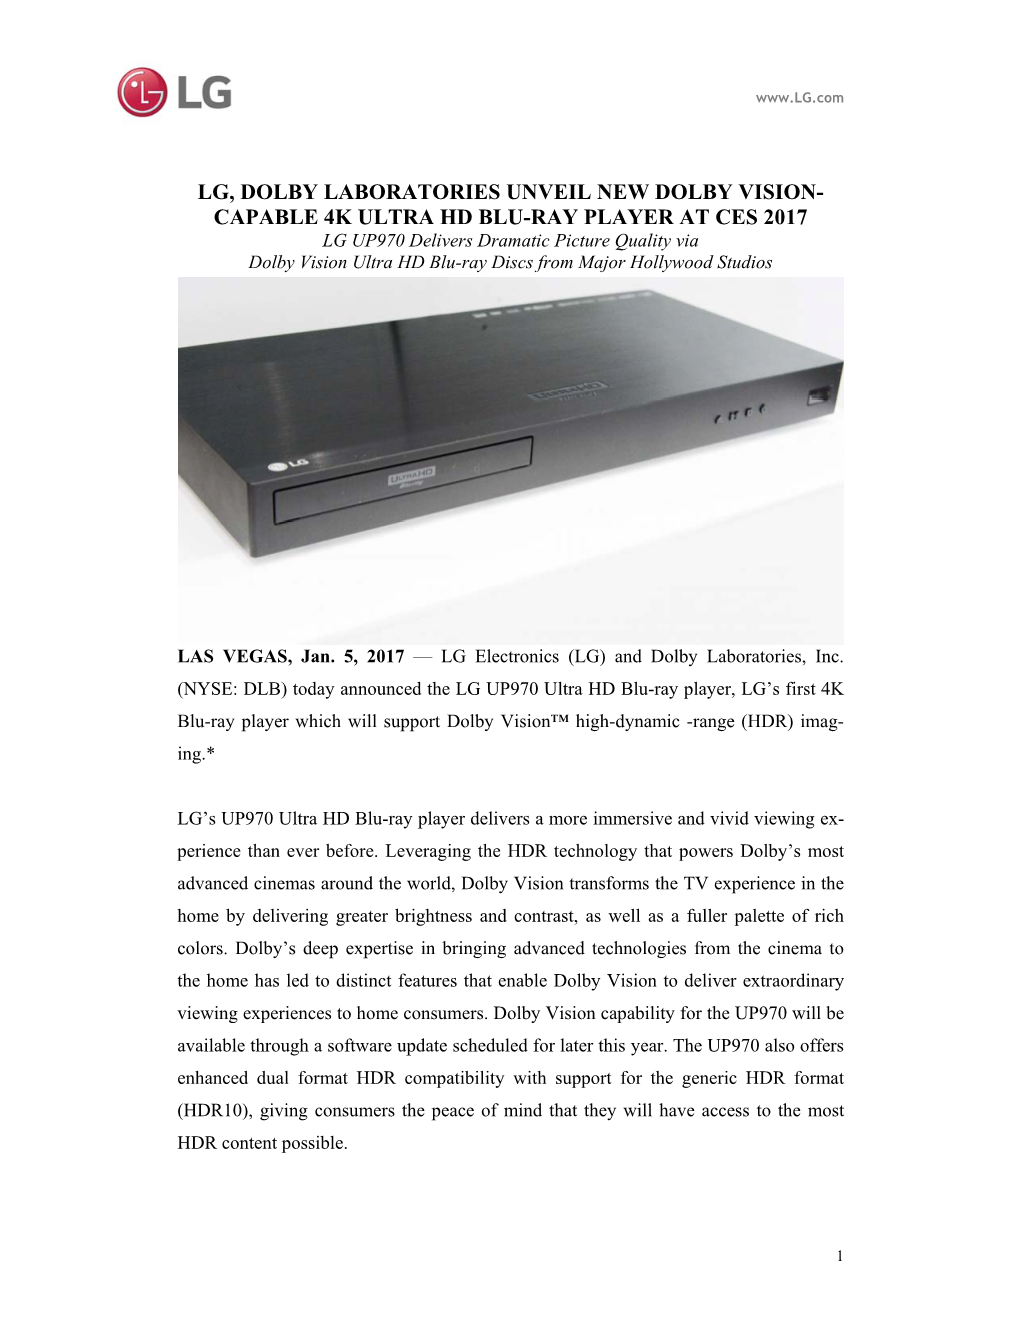 CAPABLE 4K ULTRA HD BLU-RAY PLAYER at CES 2017 LG UP970 Delivers Dramatic Picture Quality Via Dolby Vision Ultra HD Blu-Ray Discs from Major Hollywood Studios